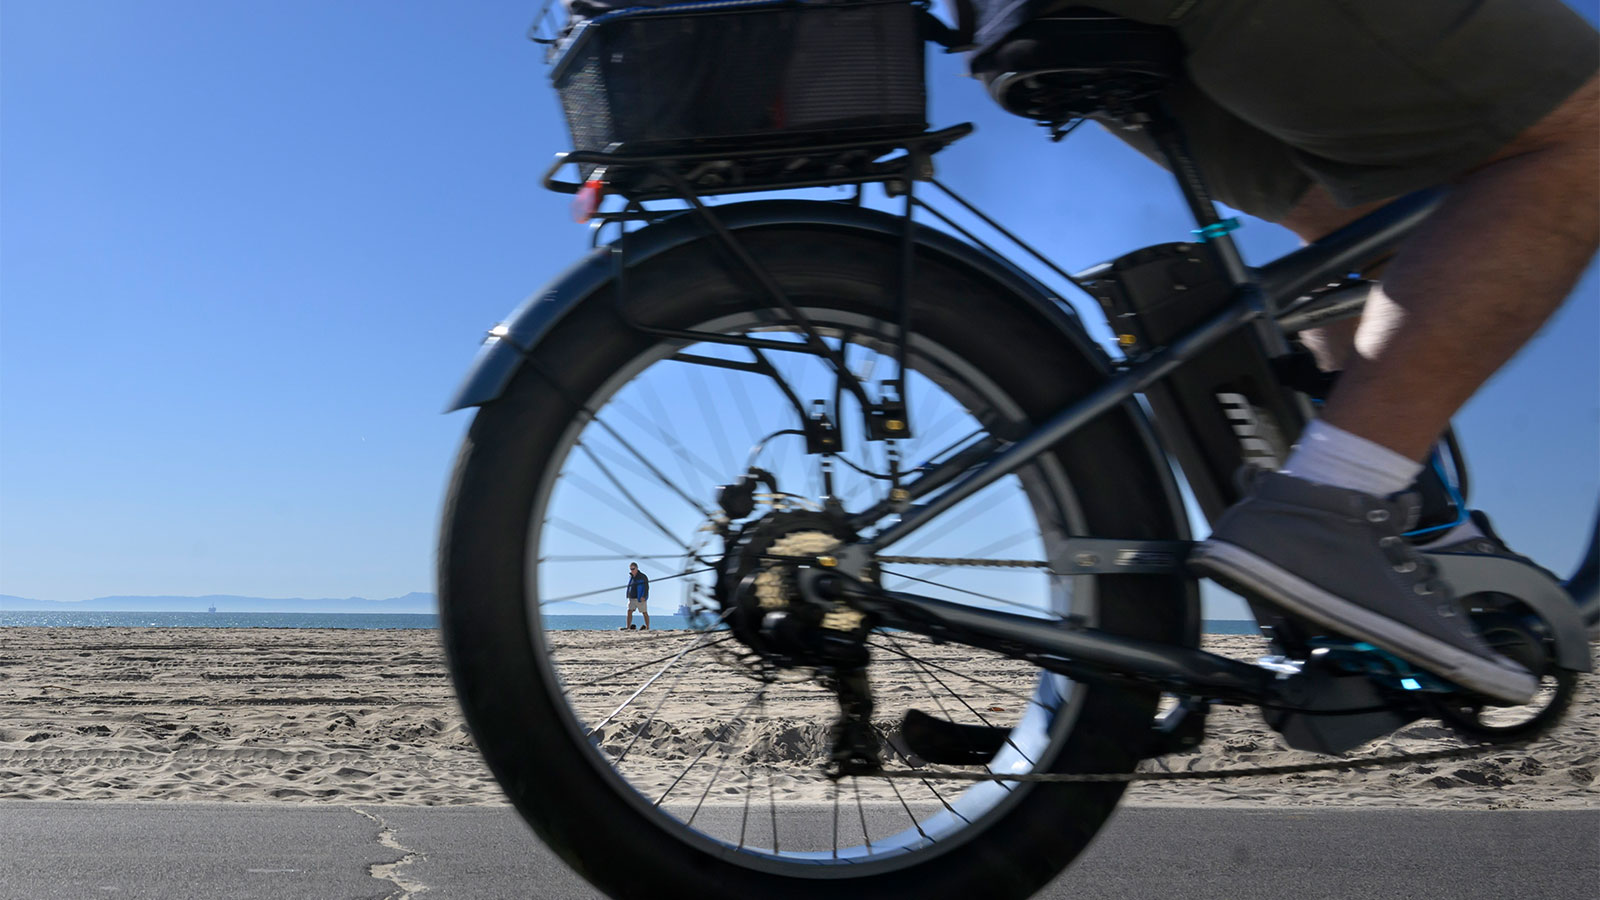 The rear tire of an e-bike is shown in front of a sandy horizon